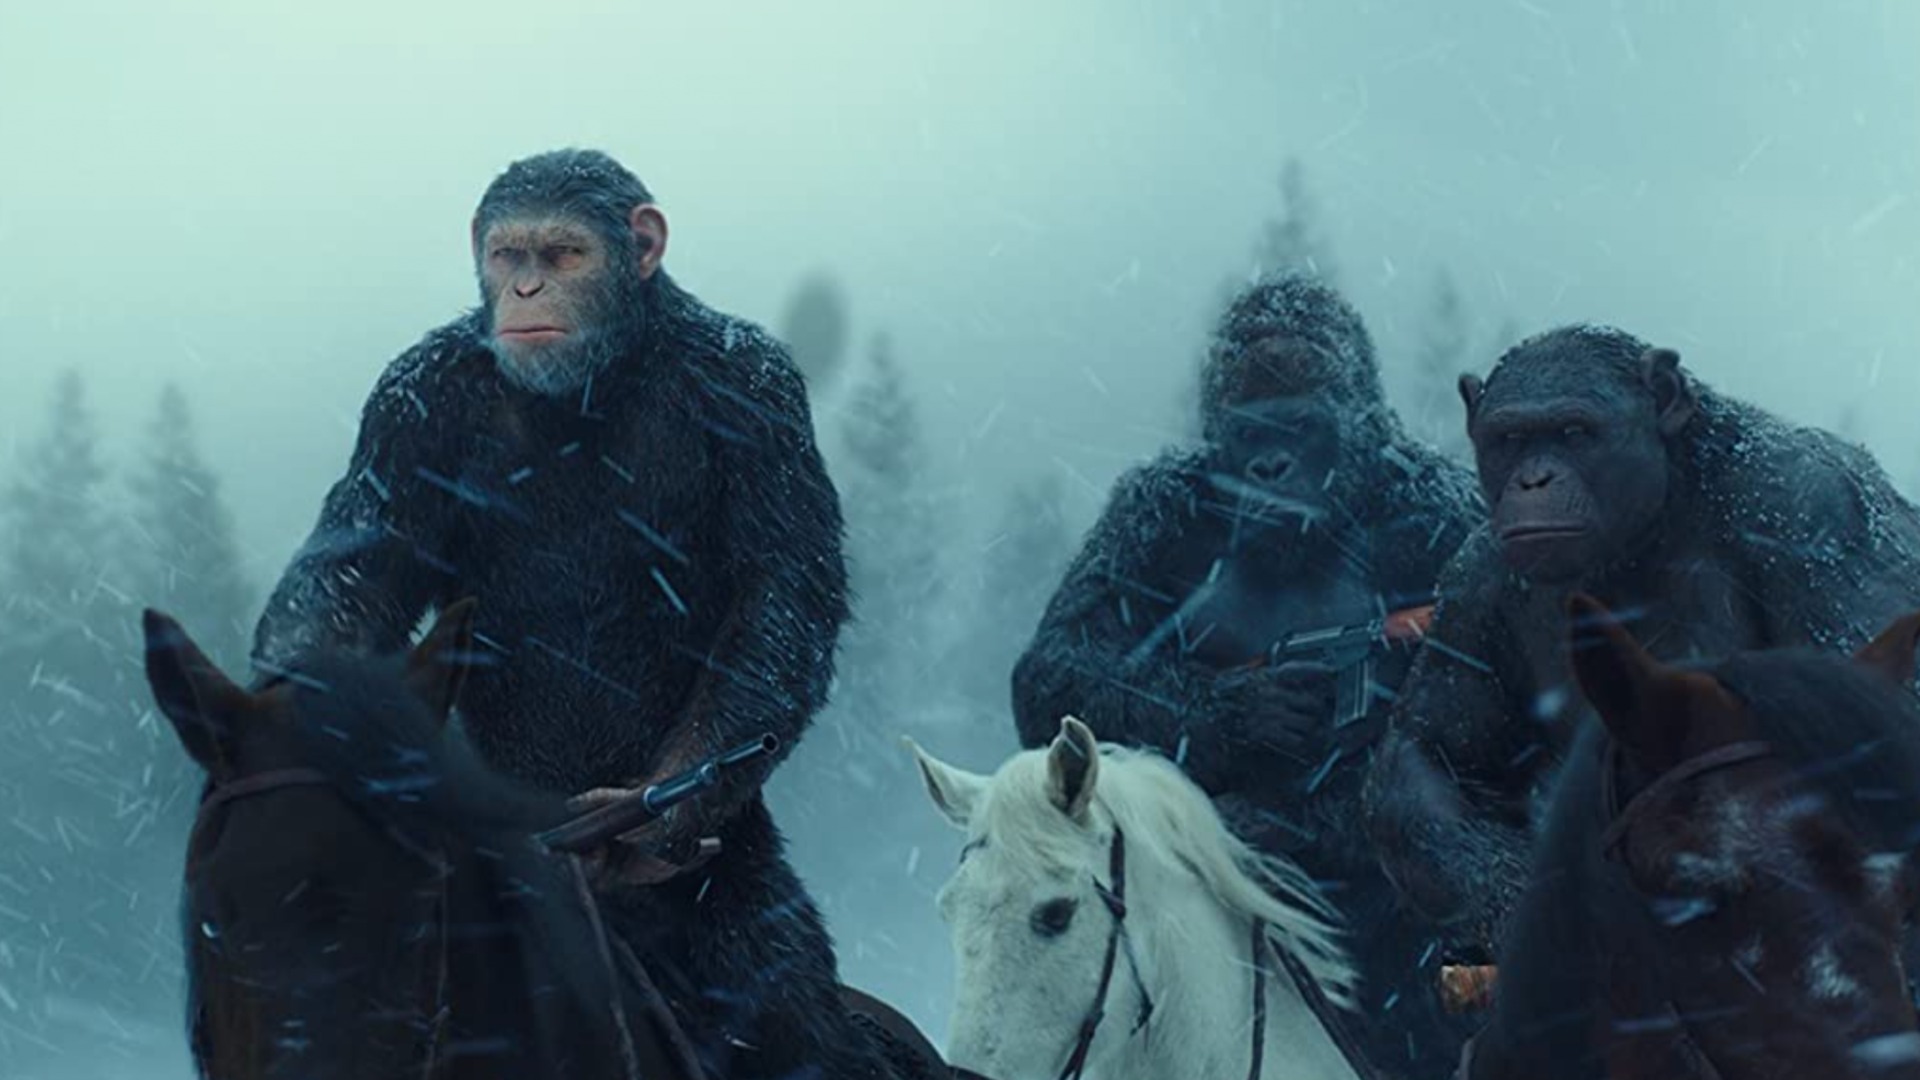 of the Apes 4 script is nearly finished with filming set to